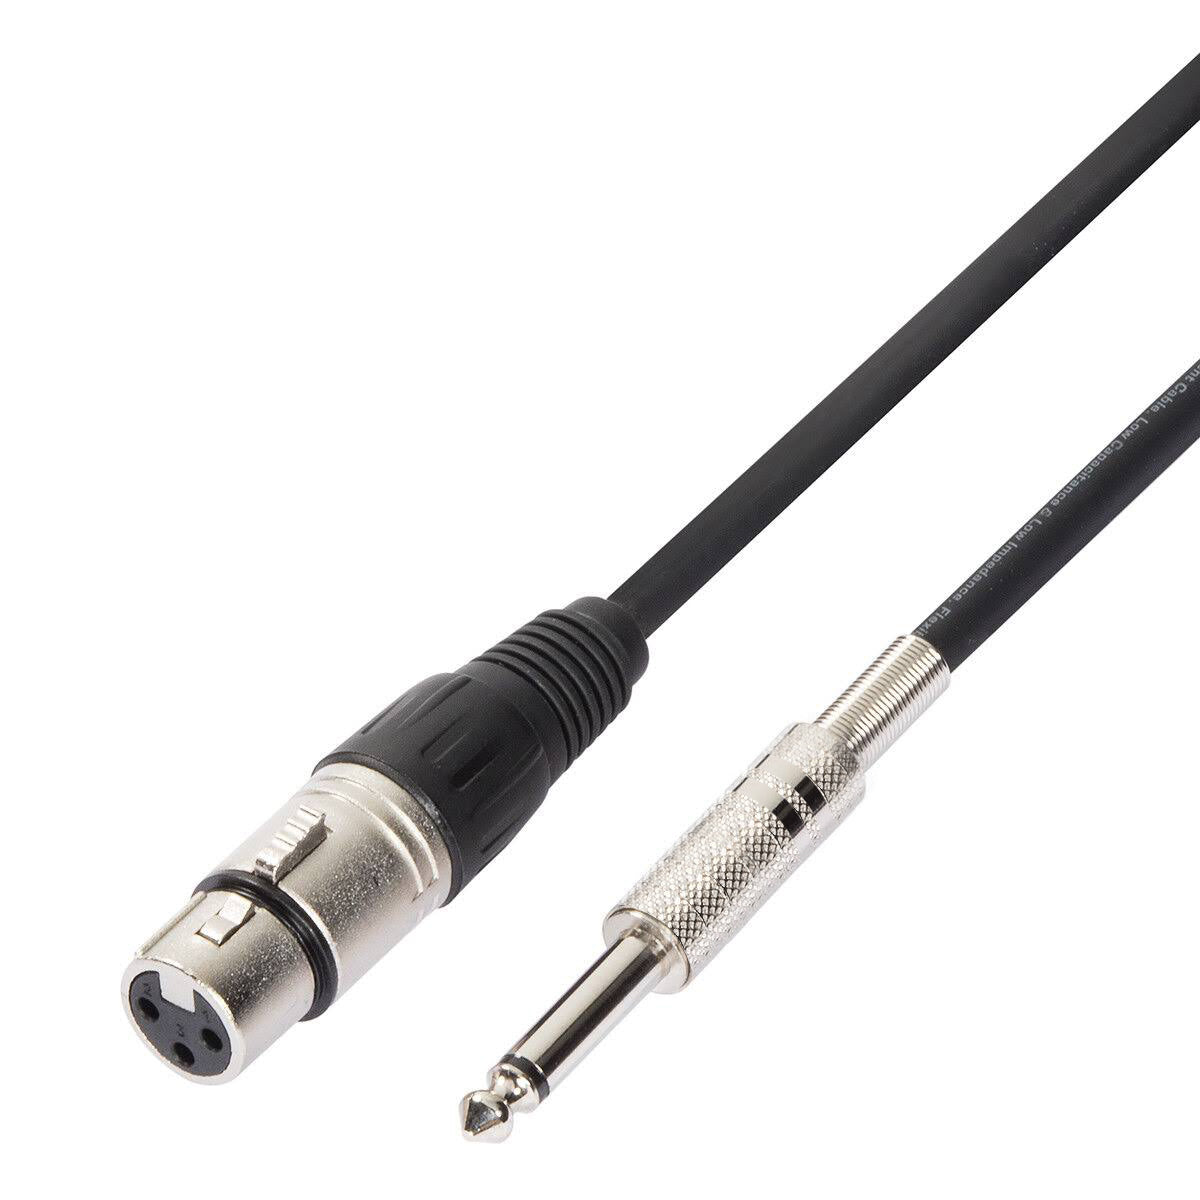 Corel Microphone Cable, XLR Cable with 6.35 mm Mono Jack, Microphone Cable with Protector, 10 Meters